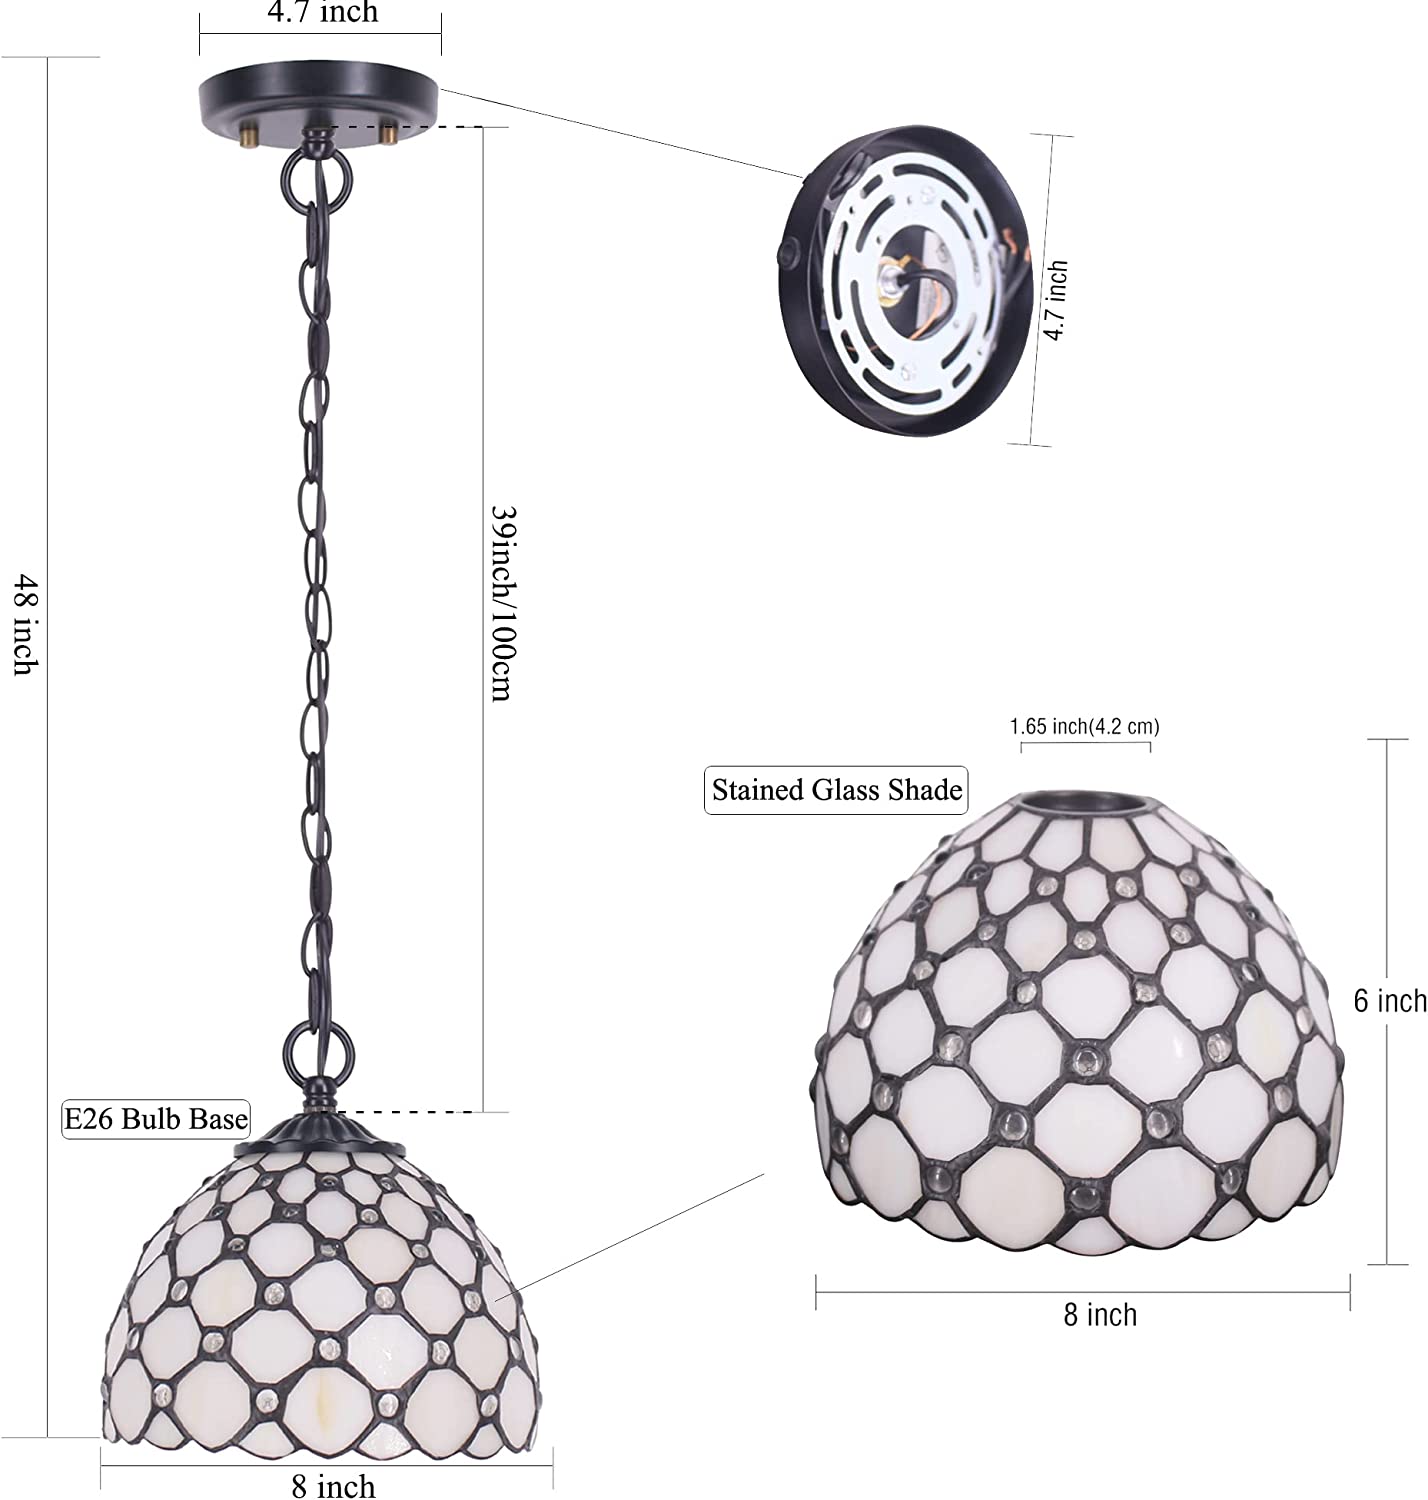 Werfactory® Tiffany Pendant Lighting with W8H7 Inch Crystal Bead White Stained Glass Hanging Lamp